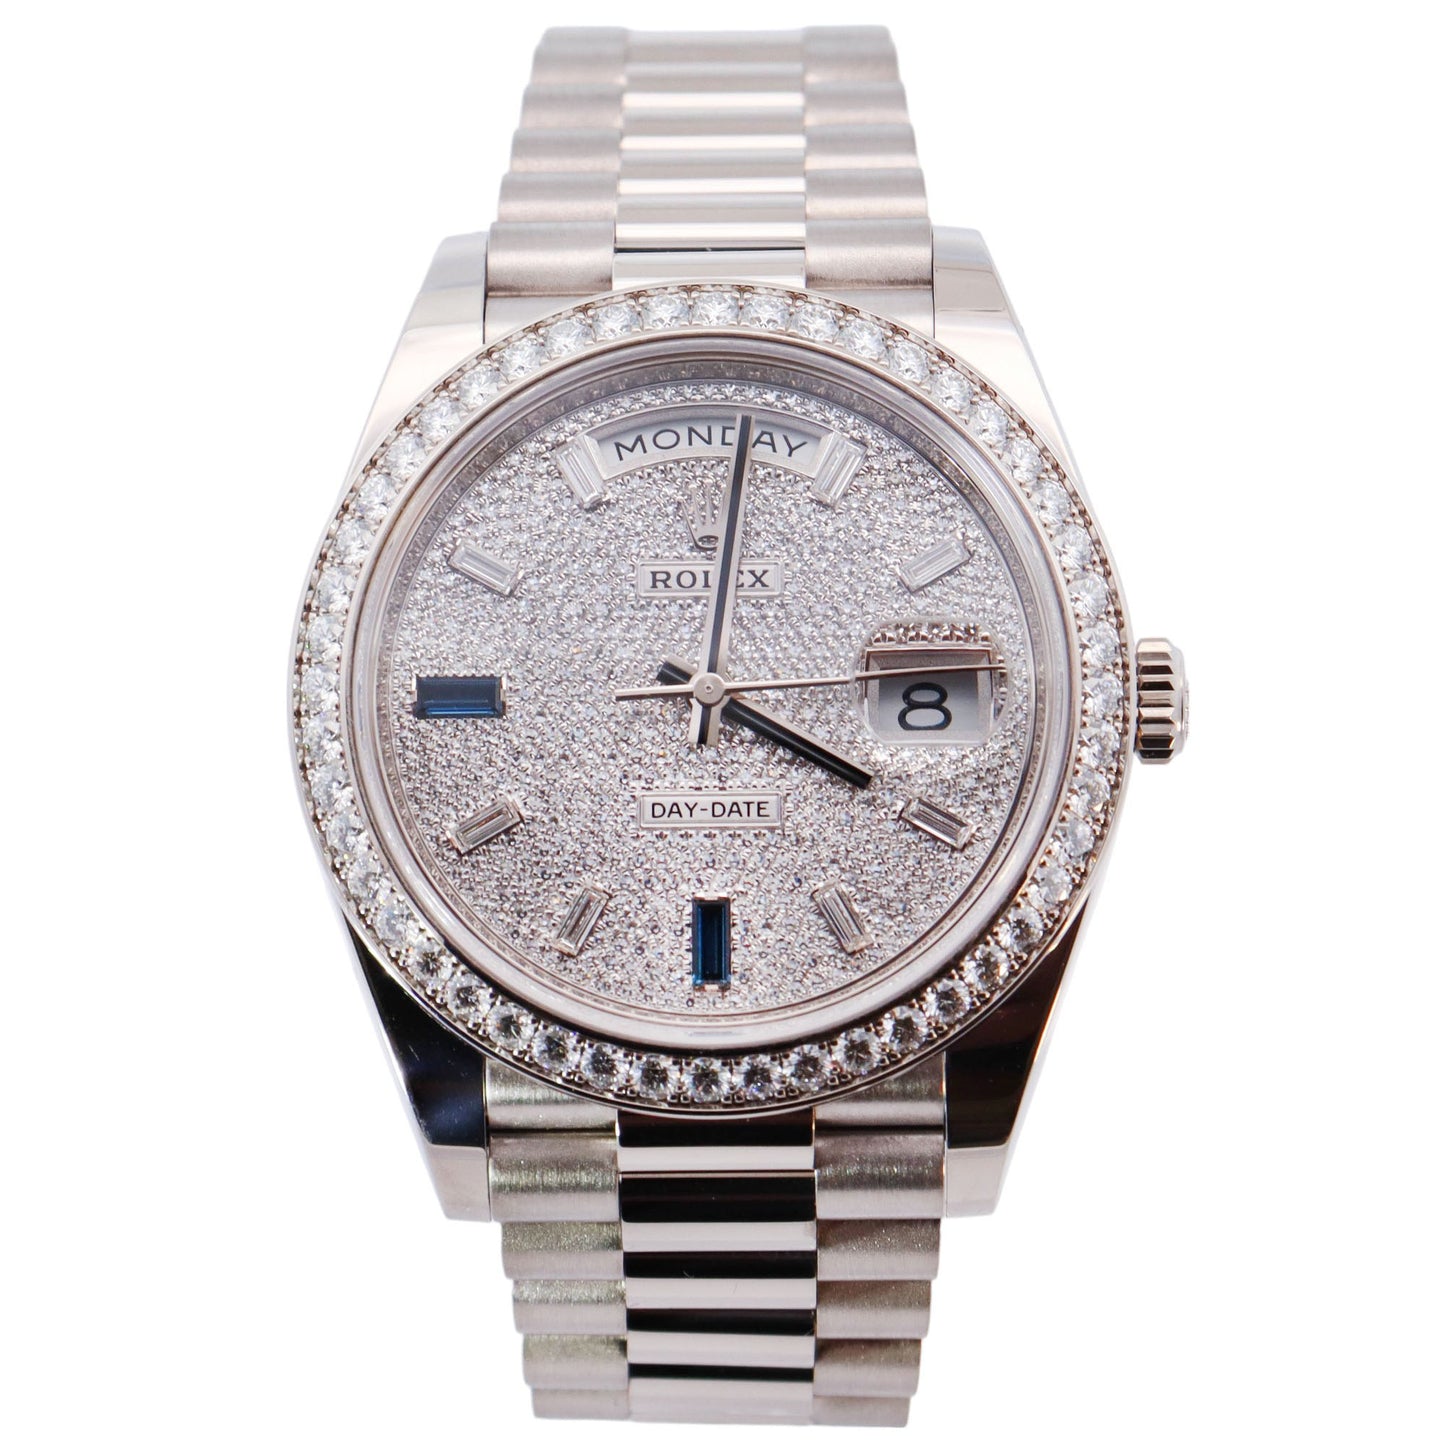 Rolex Day-Date White Gold 40mm Factory Diamond Bezel Pave Sapphire Dial Watch Reference# 228349RBR